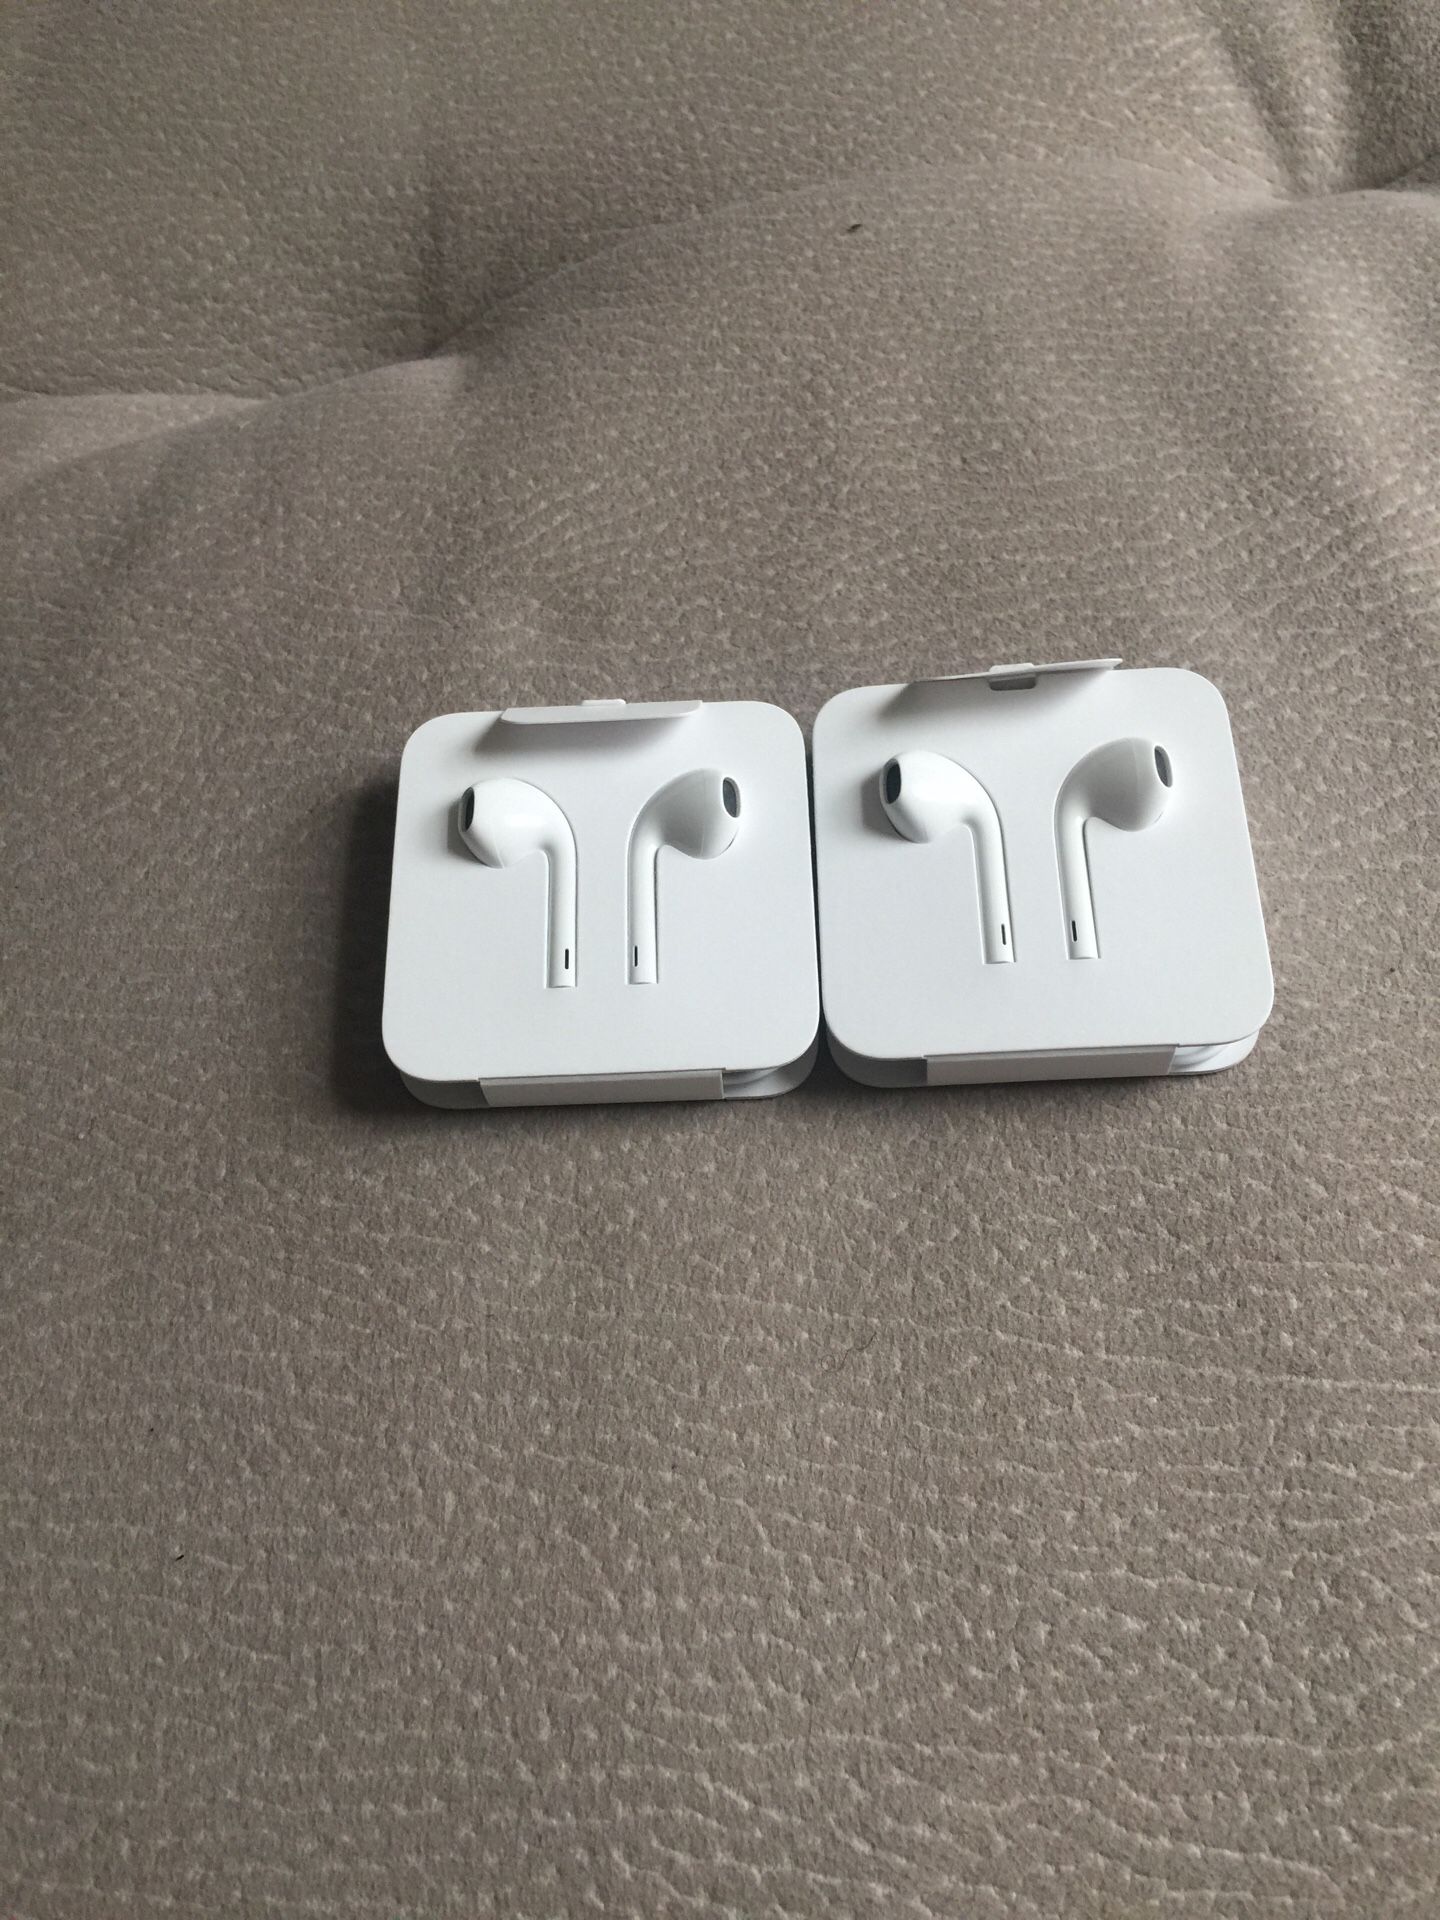 iPhone headphones came with the 8 plus